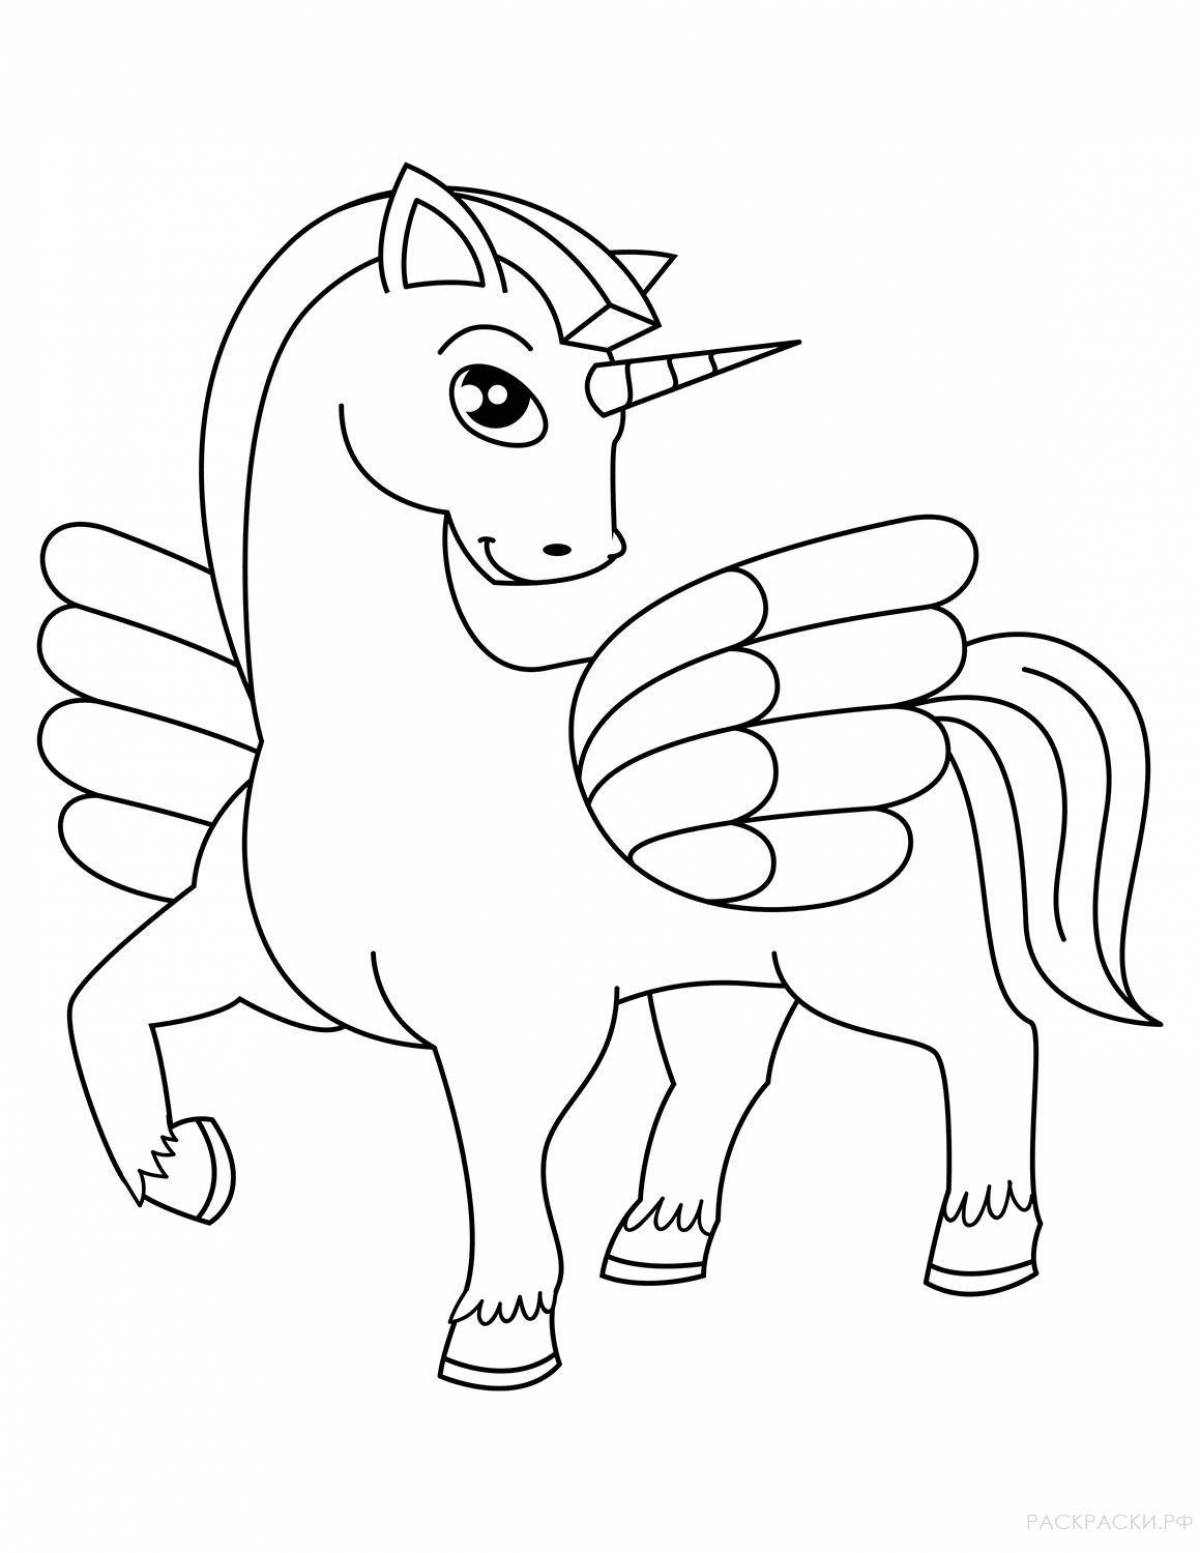 Adorable unicorn coloring book for kids 3 4